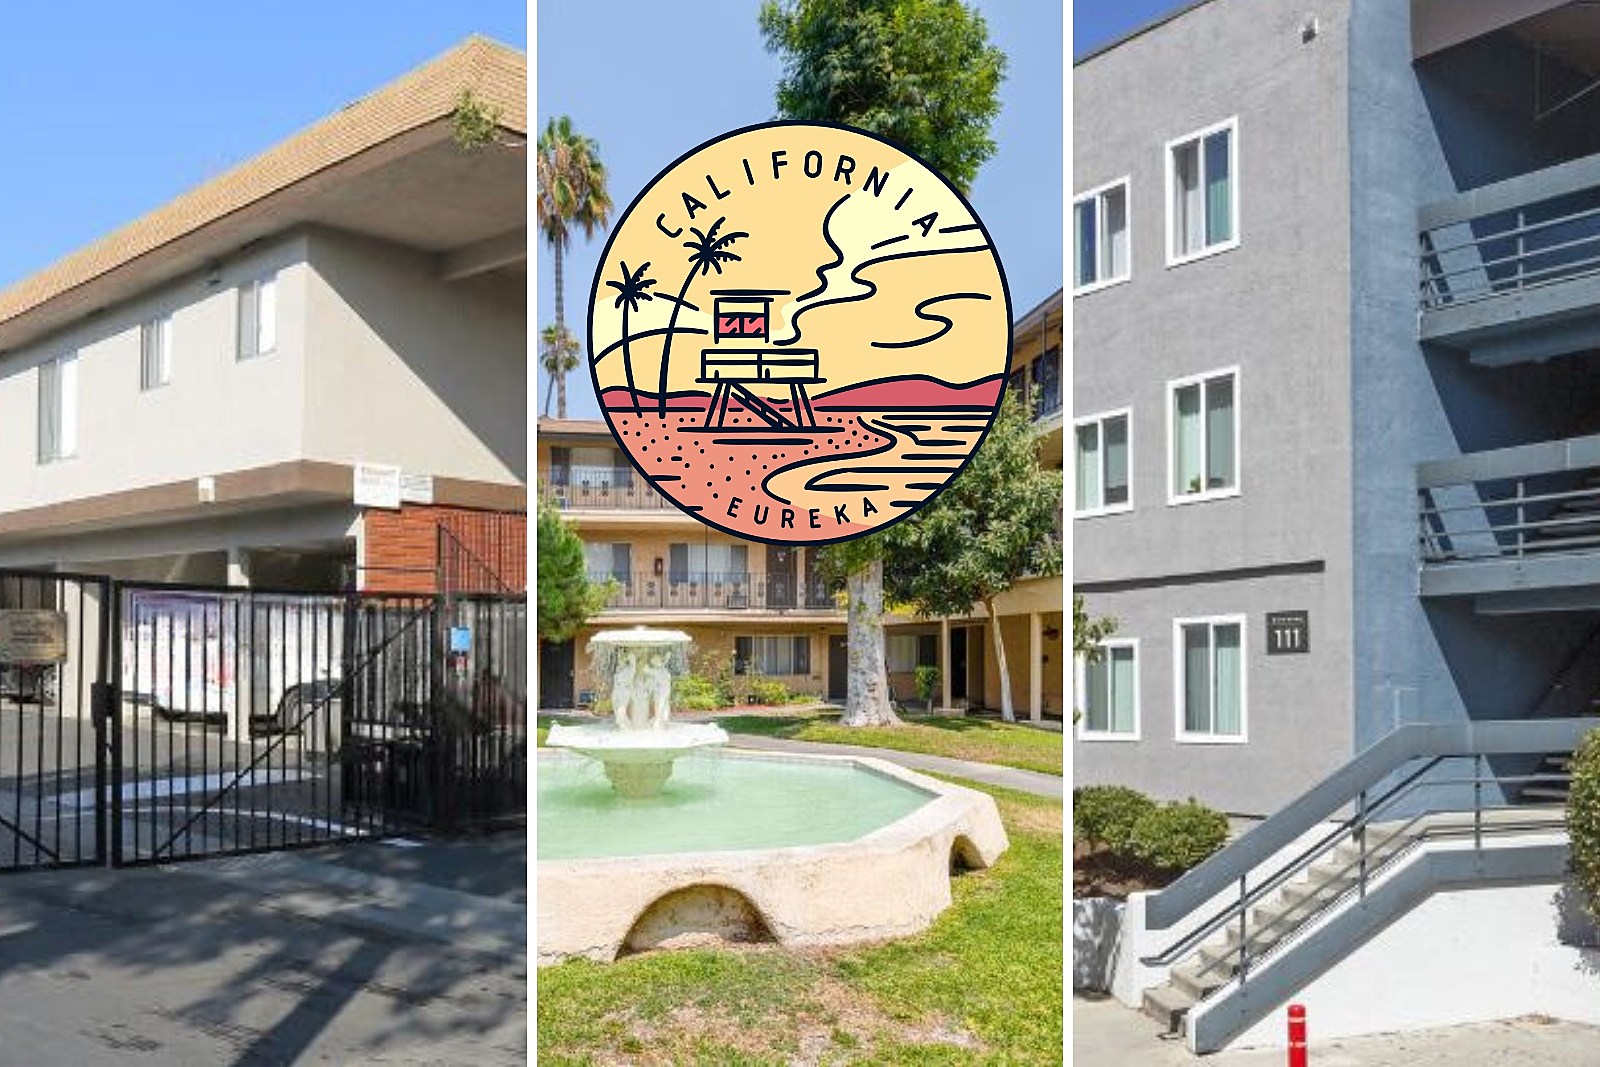 The Struggle Is Real: 3 Hardest Cities to Find an Apartment in CA